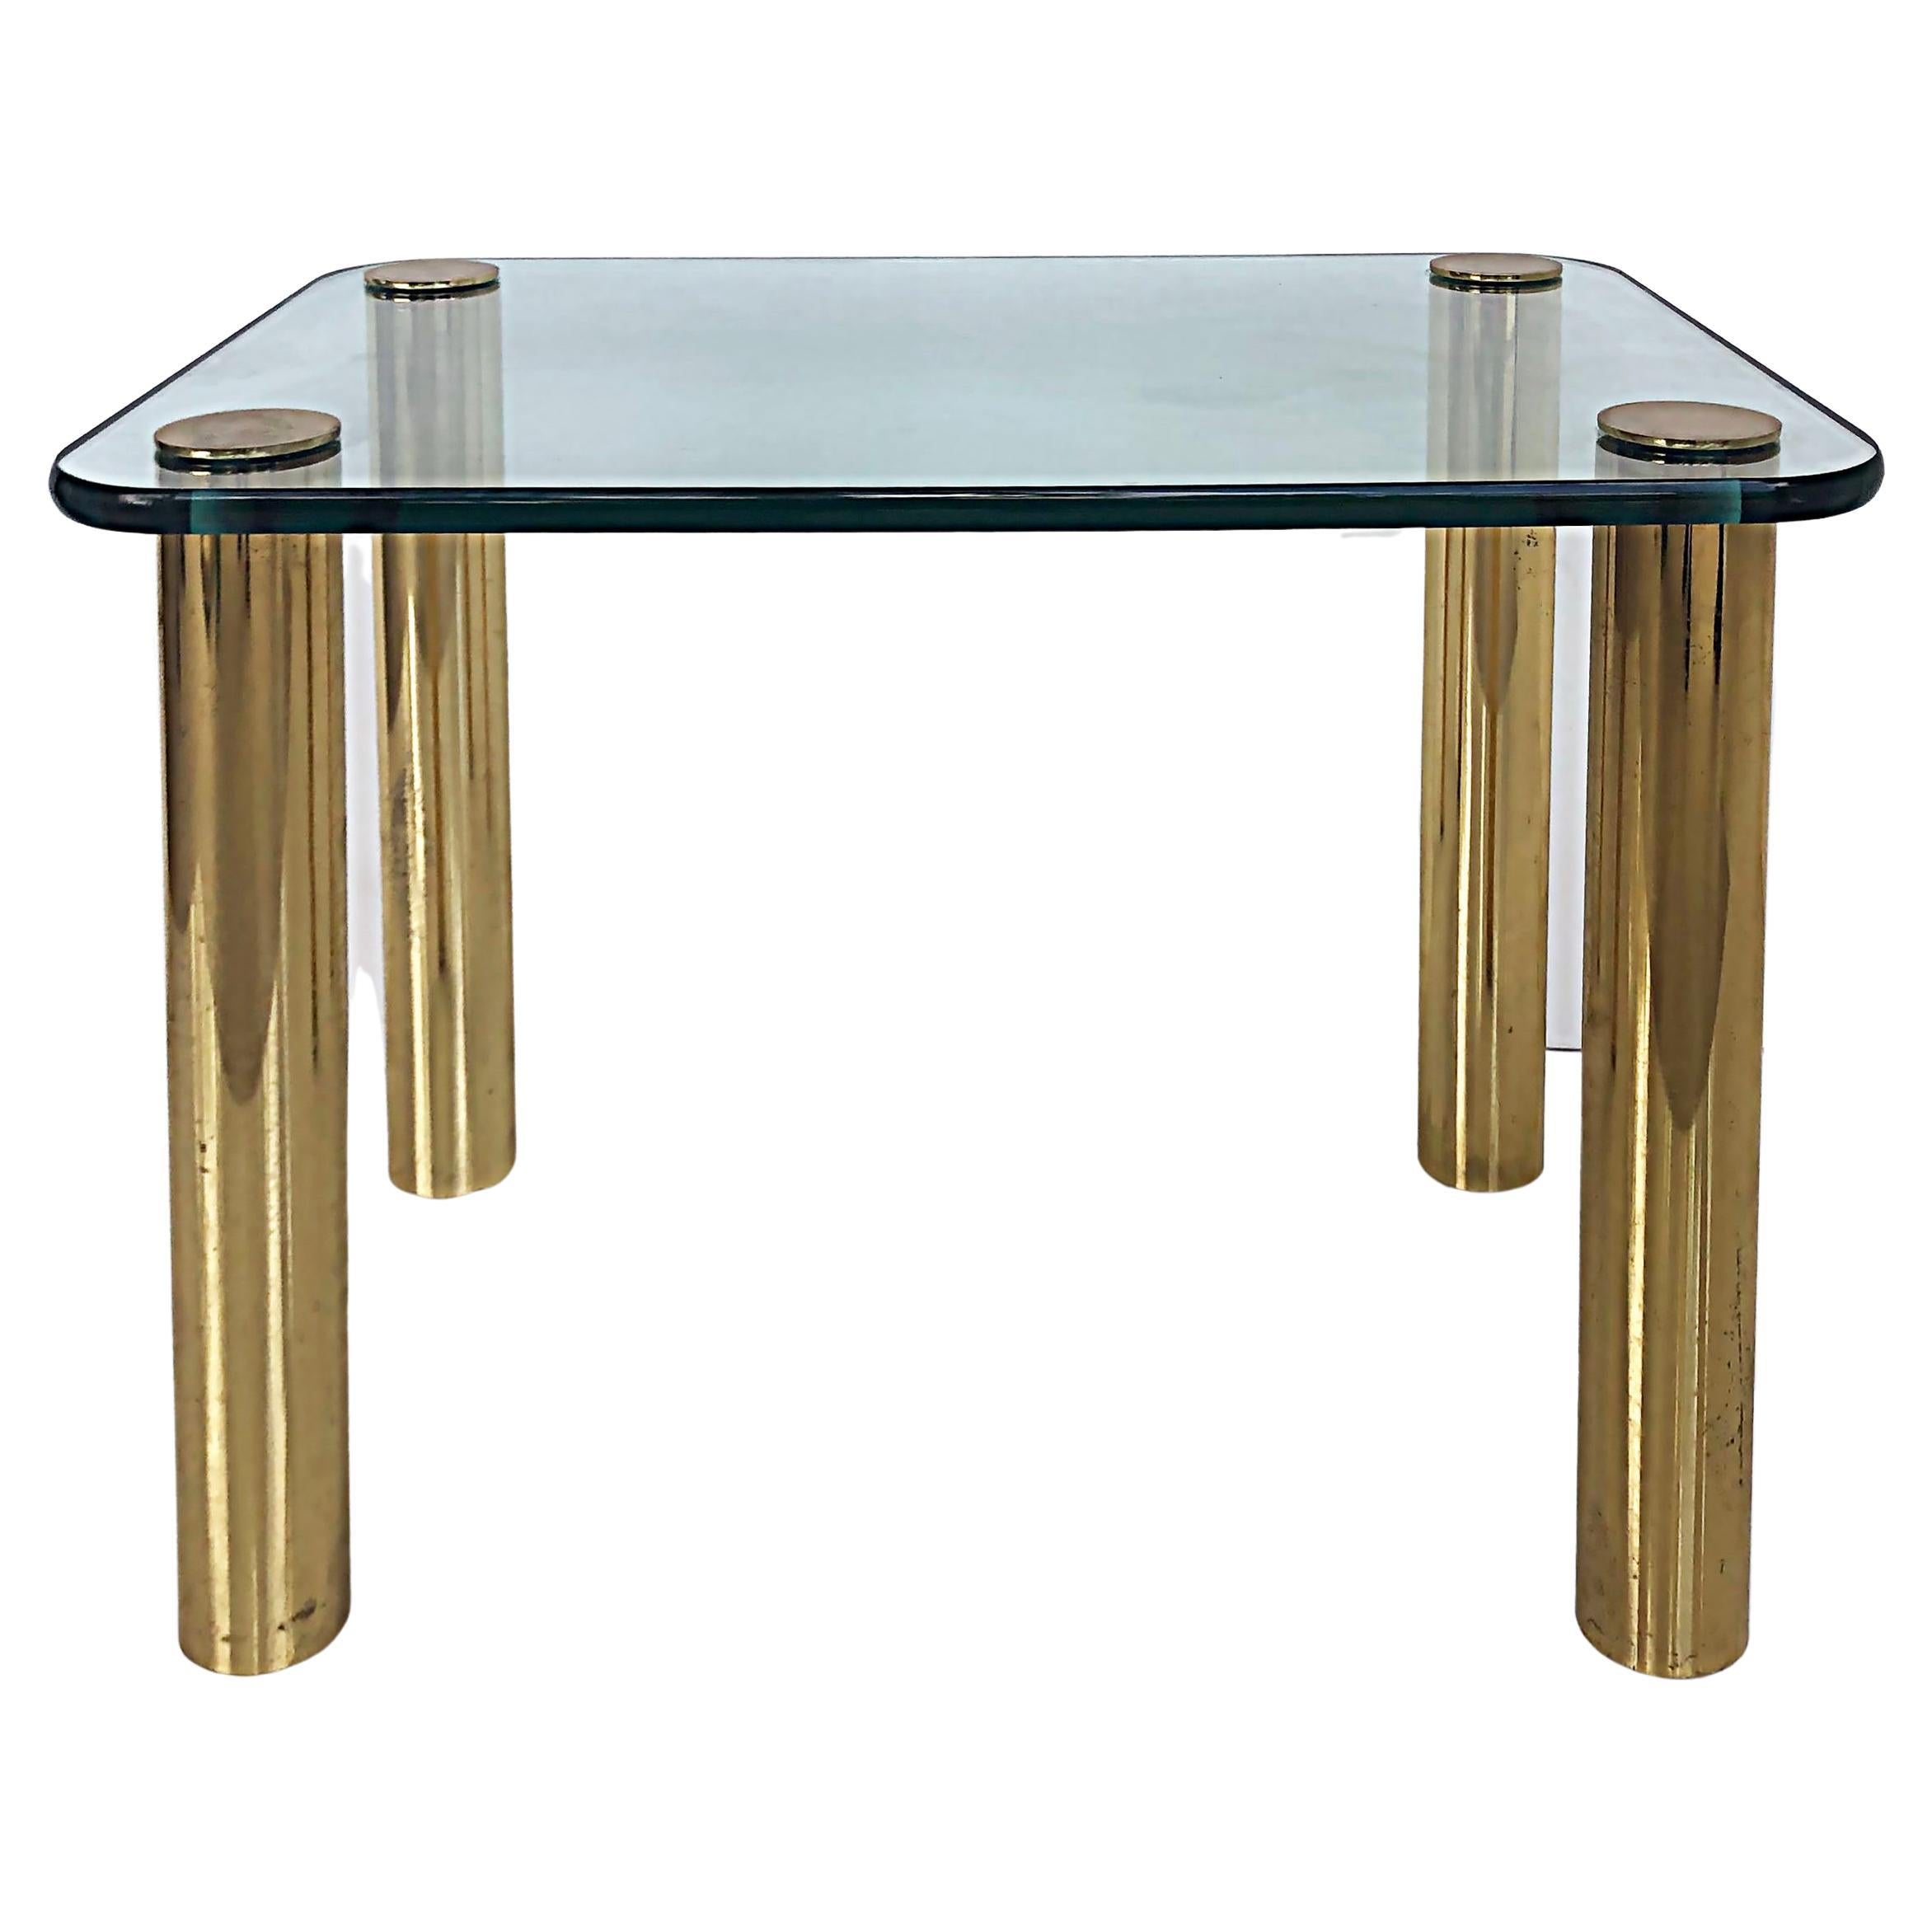 '80s Pace Collection Glass Top Side Table with Brass Legs